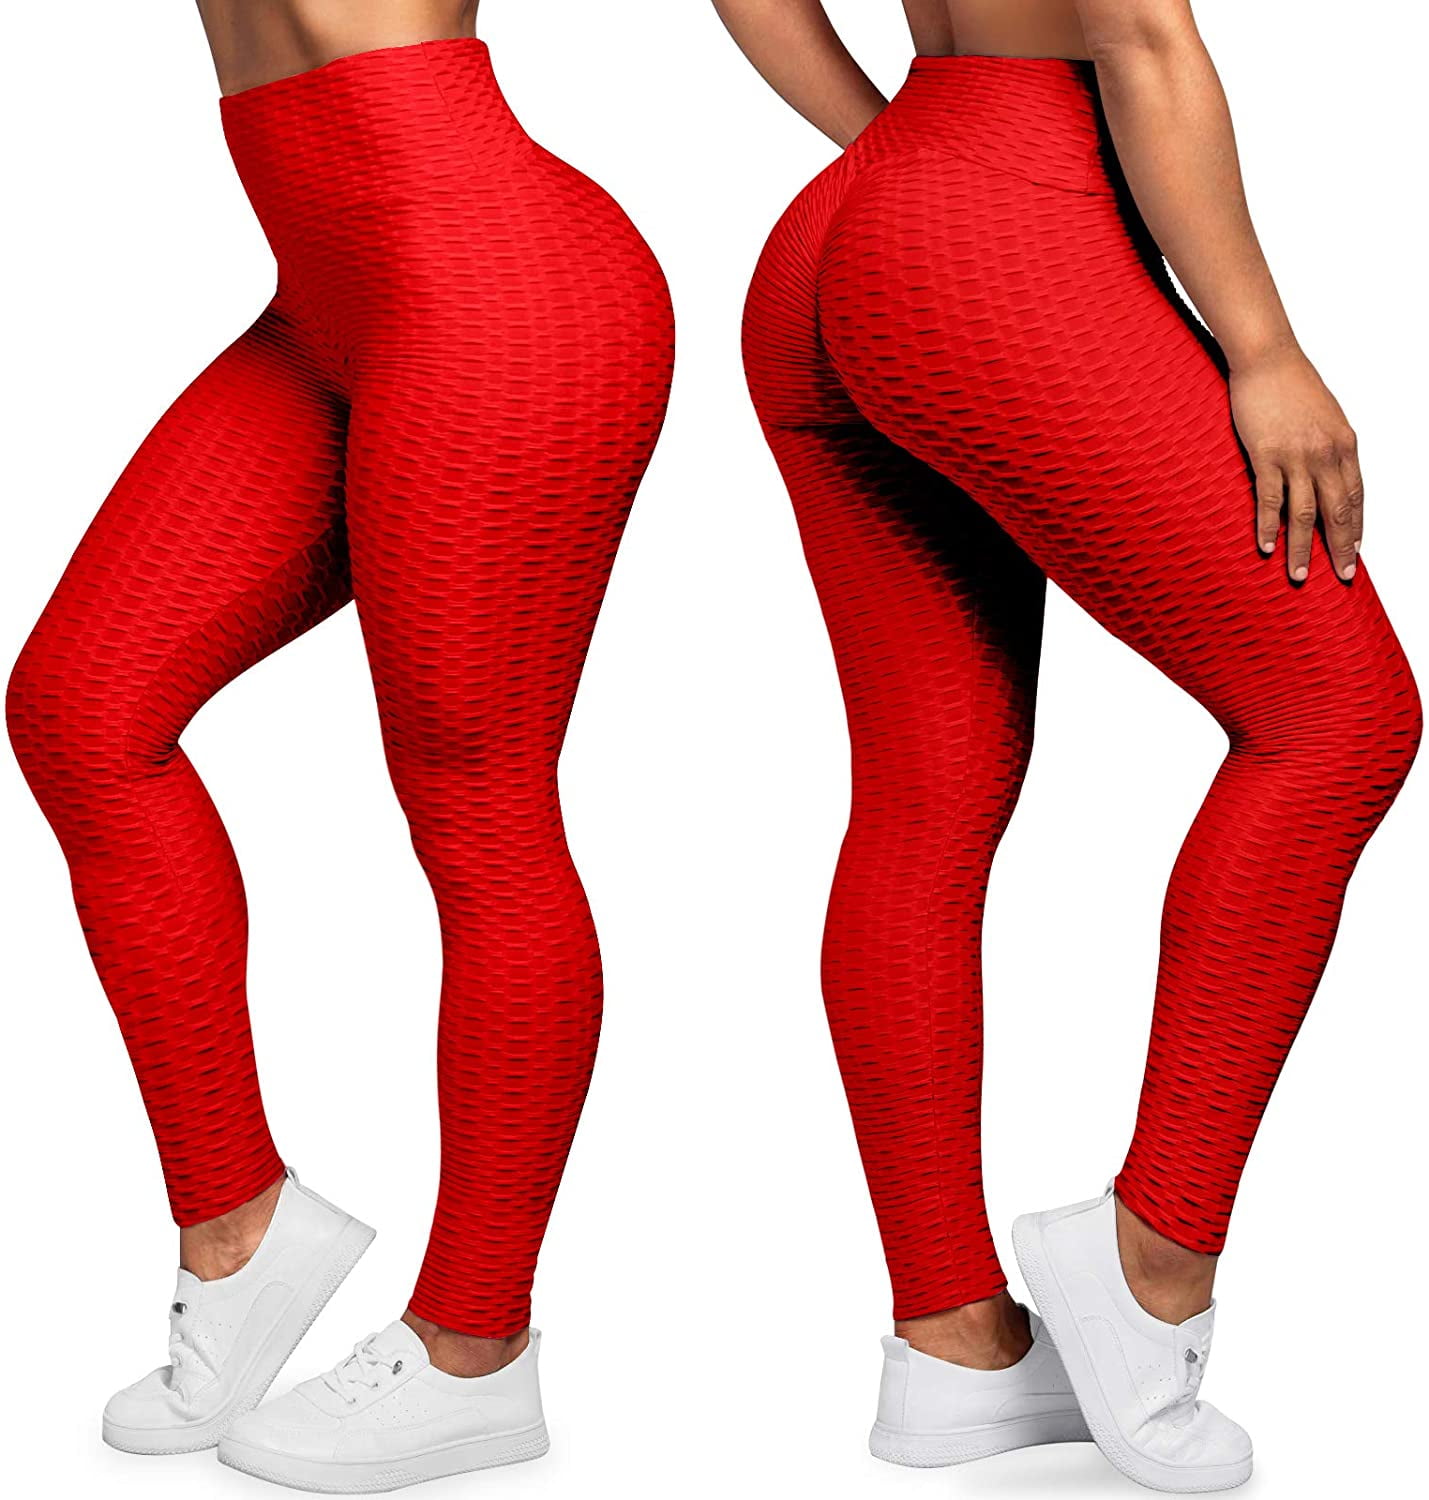 Womens Seamless Push Up Leggings Anti Cellulite, High Waist, Peach Lift,  Yoga Pants For Fitness & Sports From Yao01, $11.45